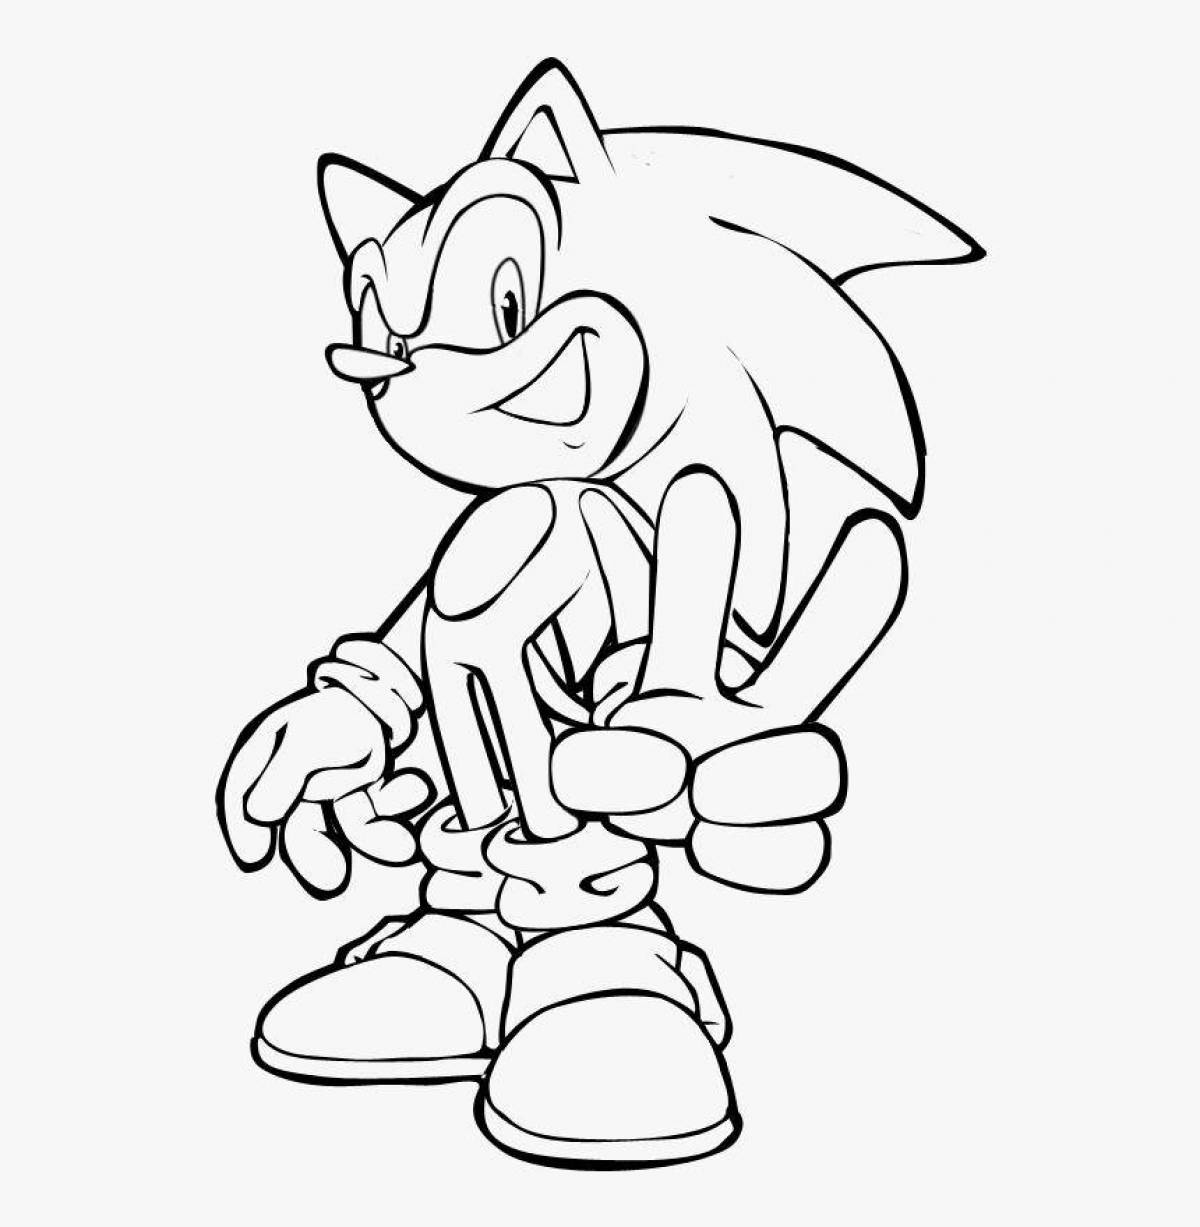 Amazing sonic drawing coloring book